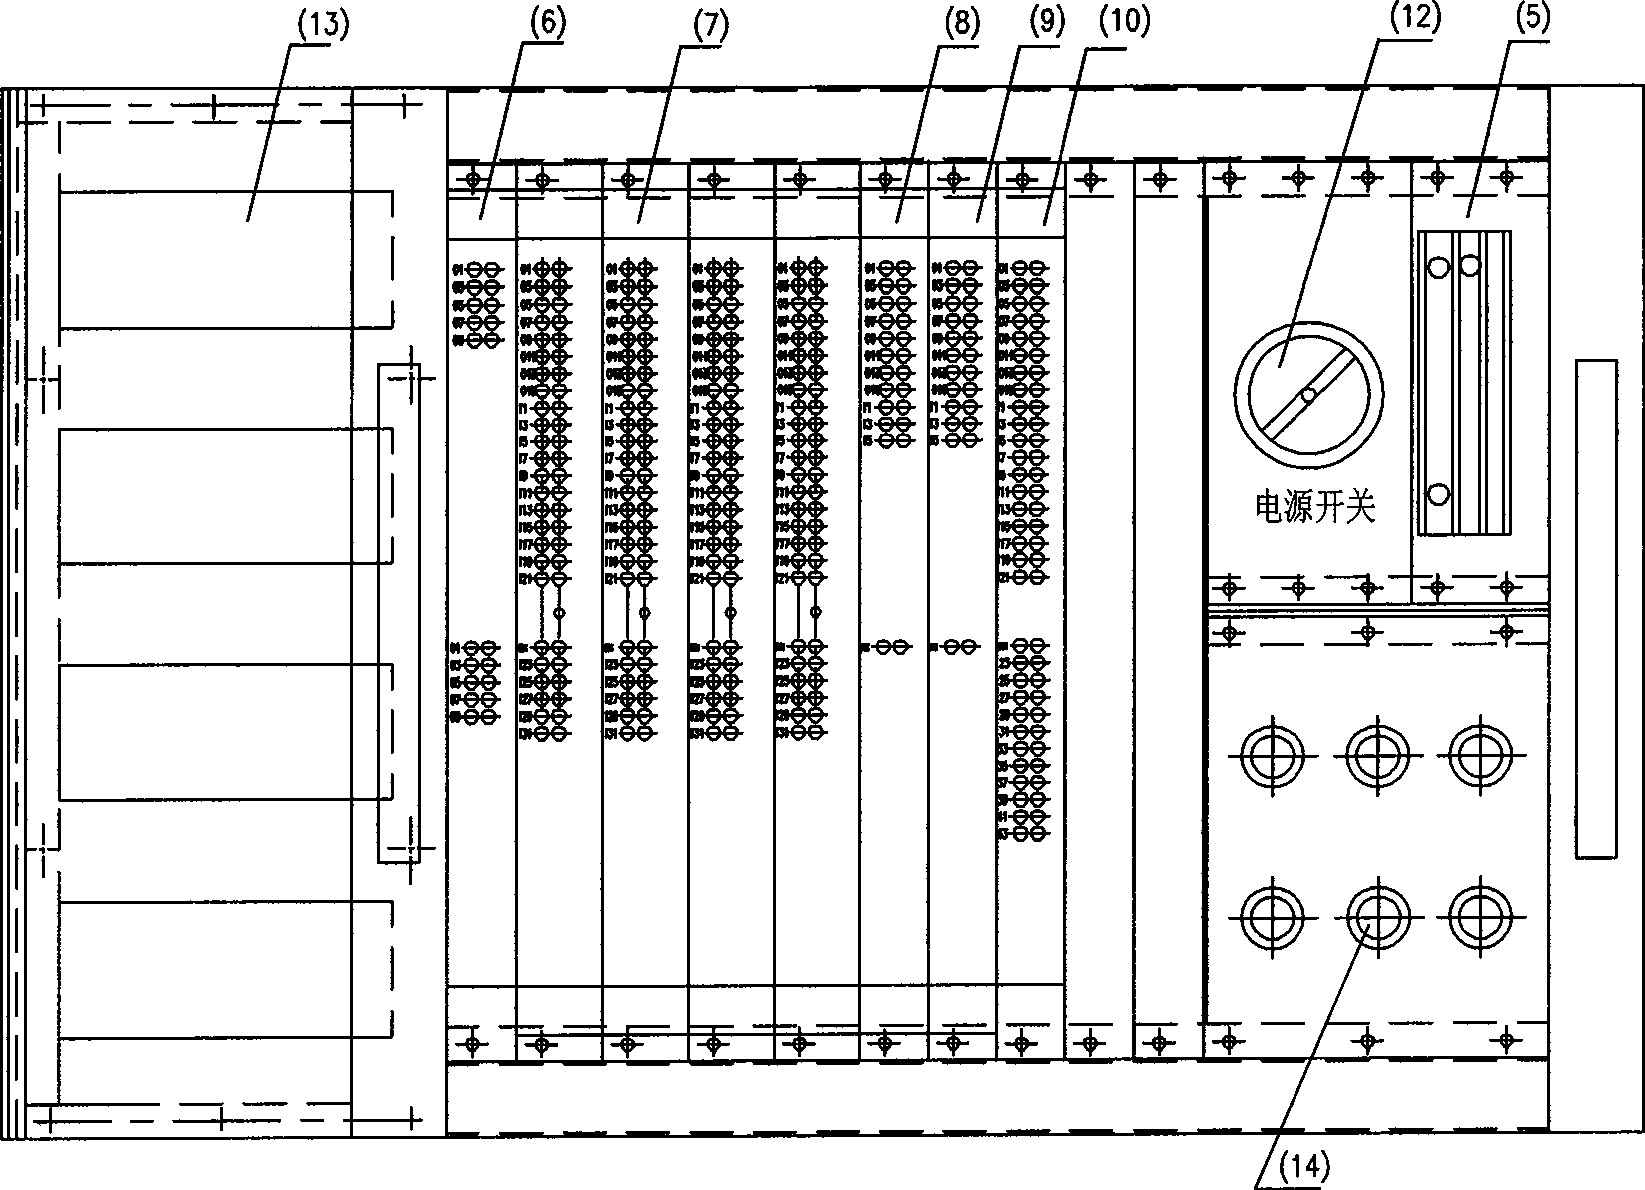 Method and device for testing microcomputer control system of diesel locomotive